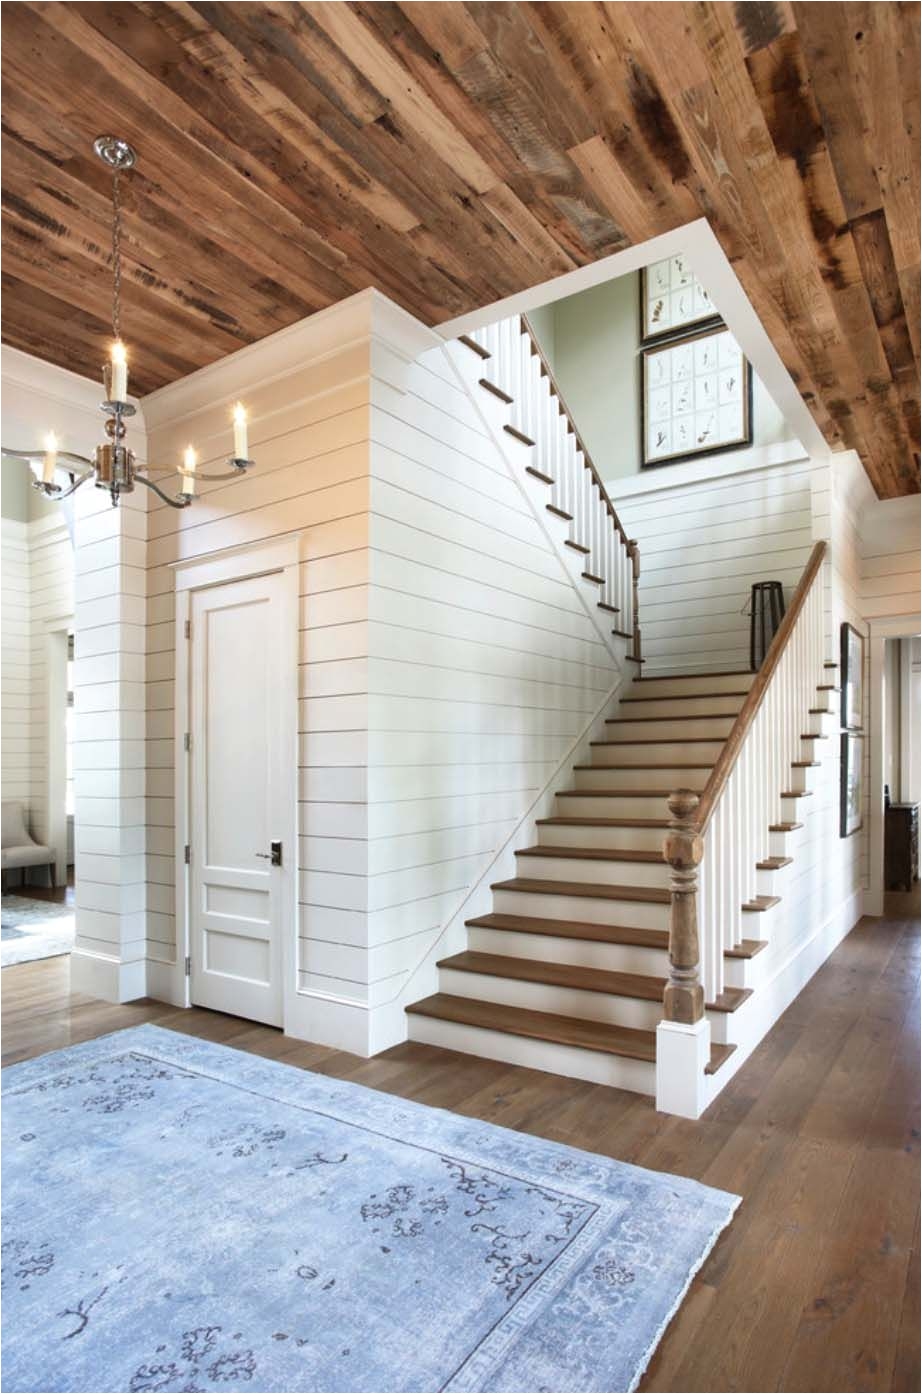 Shiplap Siding Interior Walls Home Depot 37 Most Beautiful Examples Of Using Shiplap In the Home Pinterest